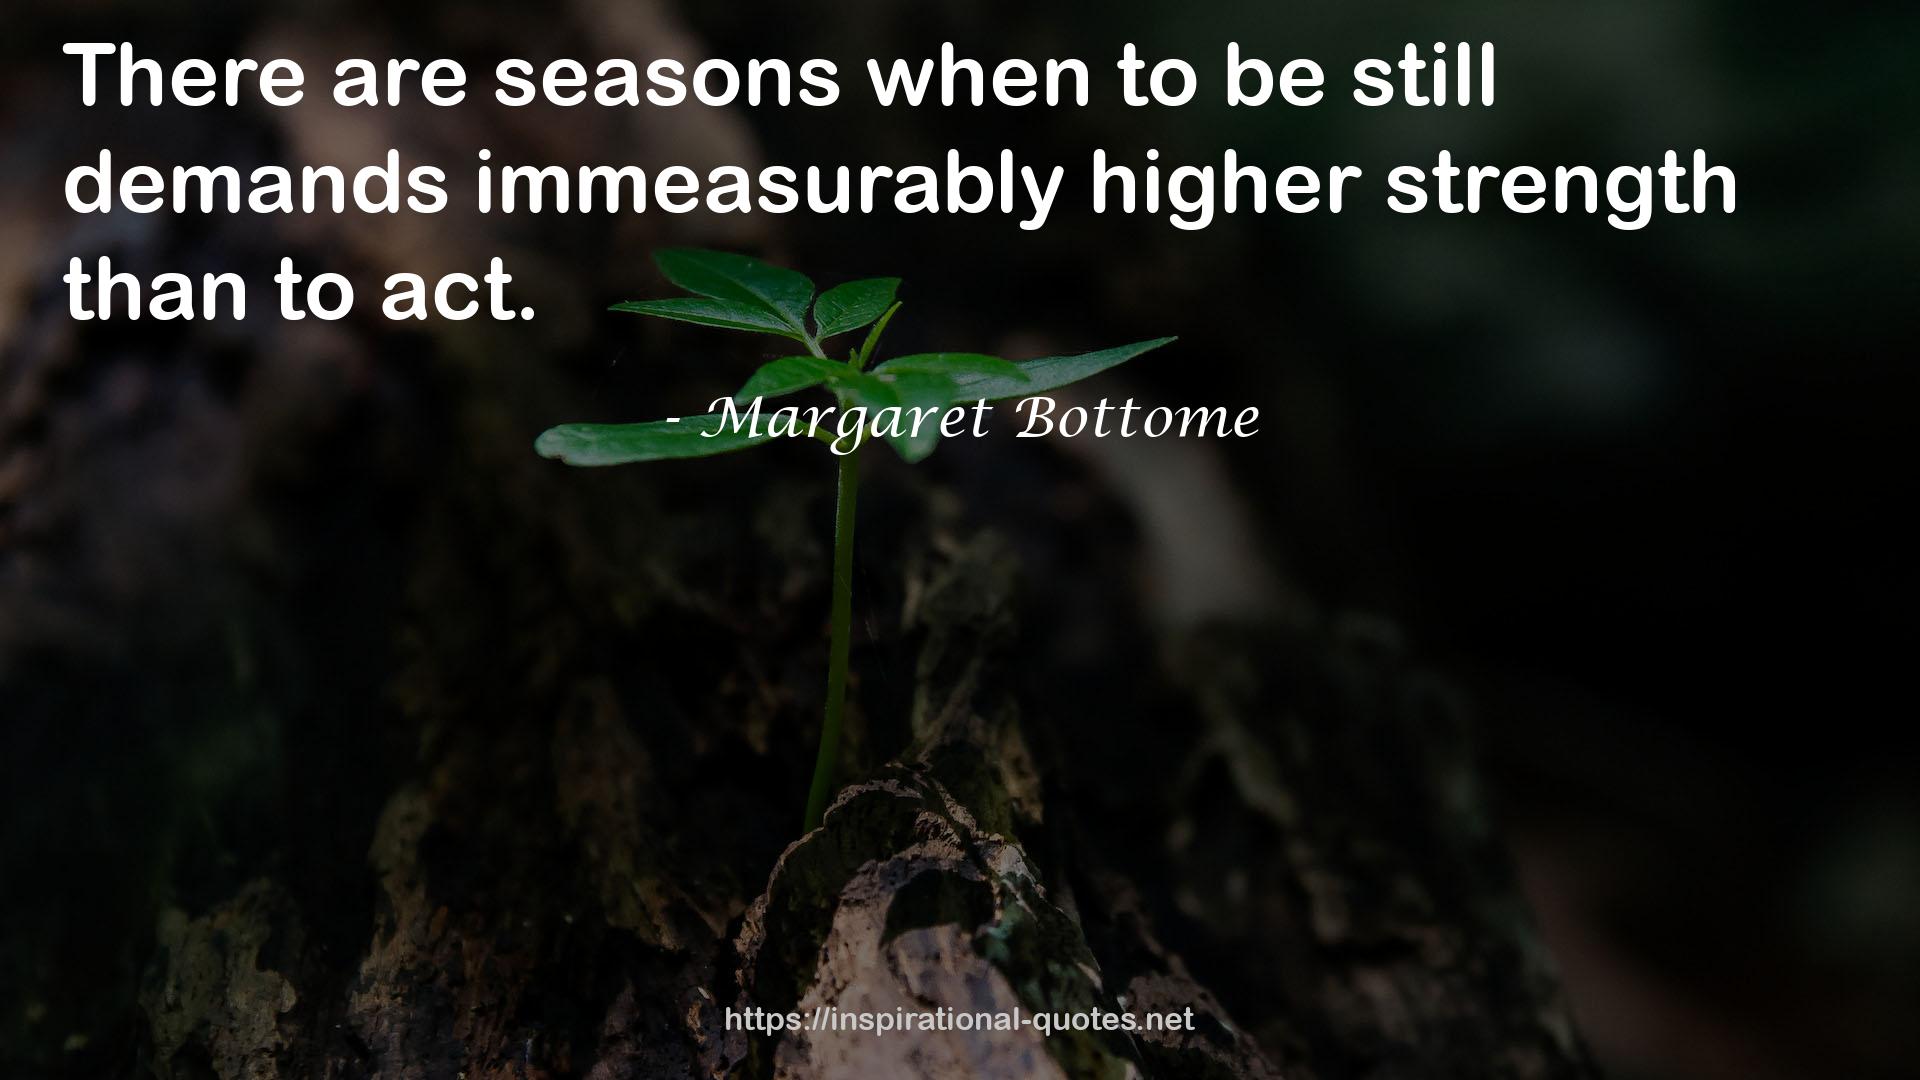 Margaret Bottome QUOTES